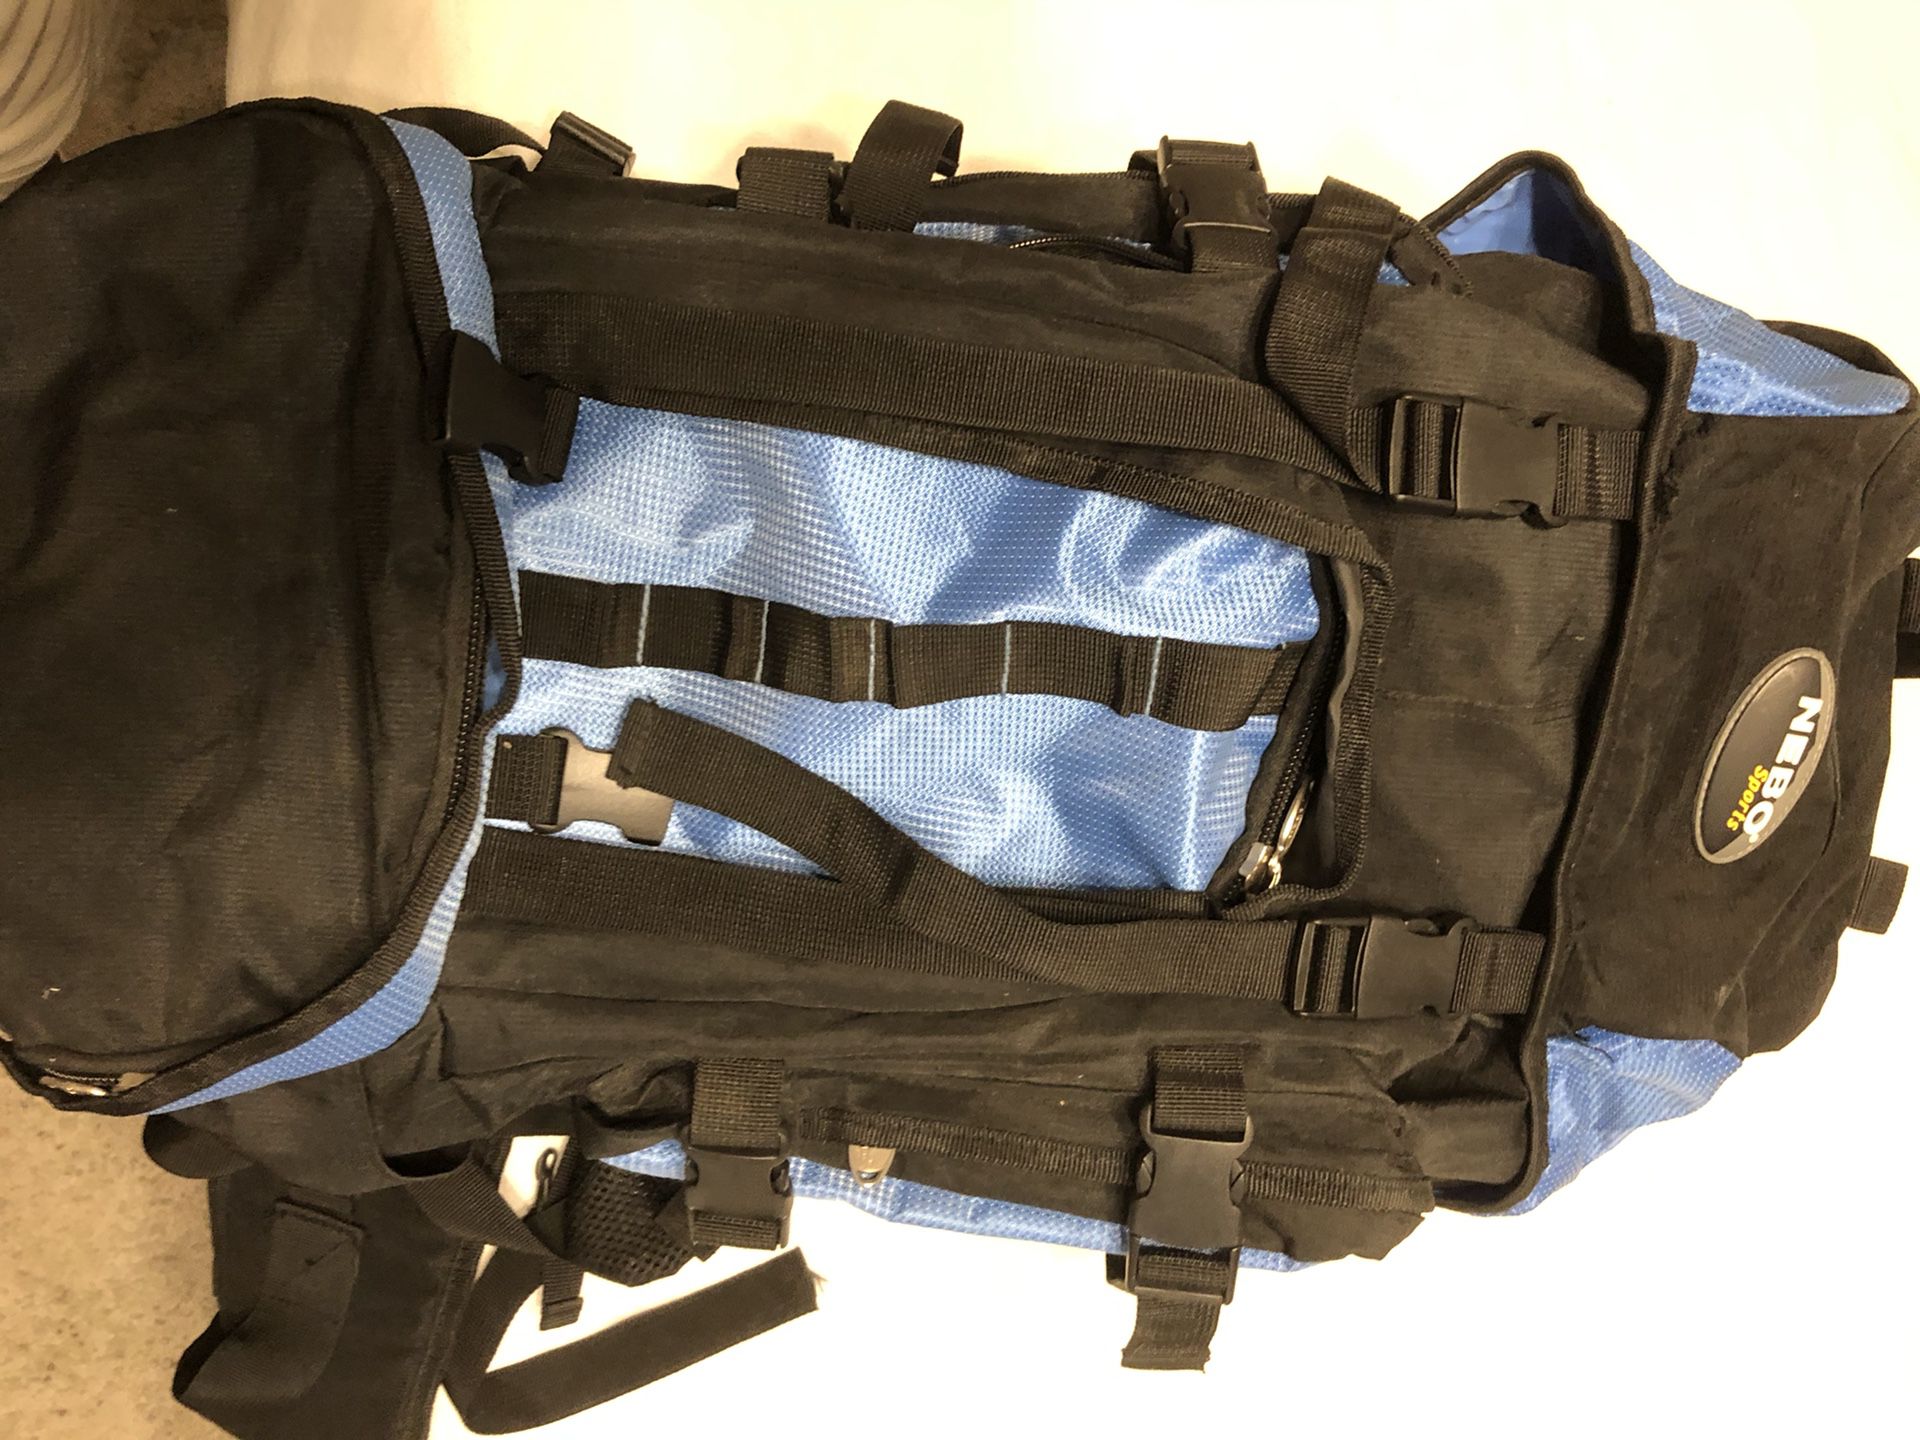 Nebo sports backpack good for day hiking or multi day trips